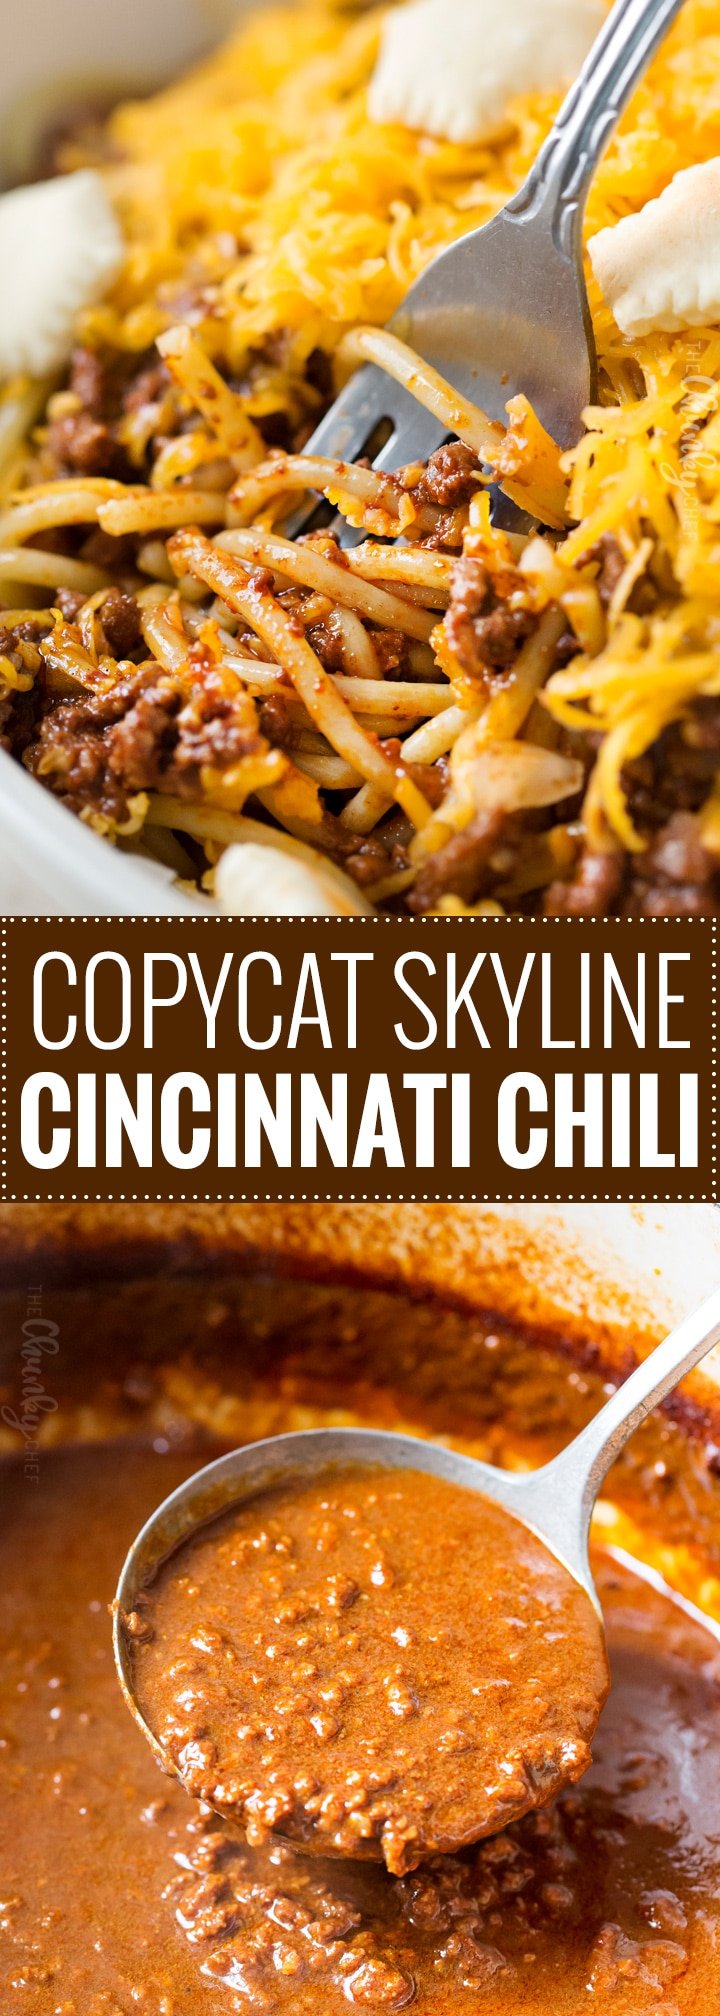 Copycat Skyline Cincinnati Chili | Unique and flavorful, this regional chili is rich, meaty, packed with spices, and can be served in so many ways!  Try Cincinnati's spin on chili! | https://www.thechunkychef.com | #dinner #cincinnati #chili #copycat #homemade #easyrecipe